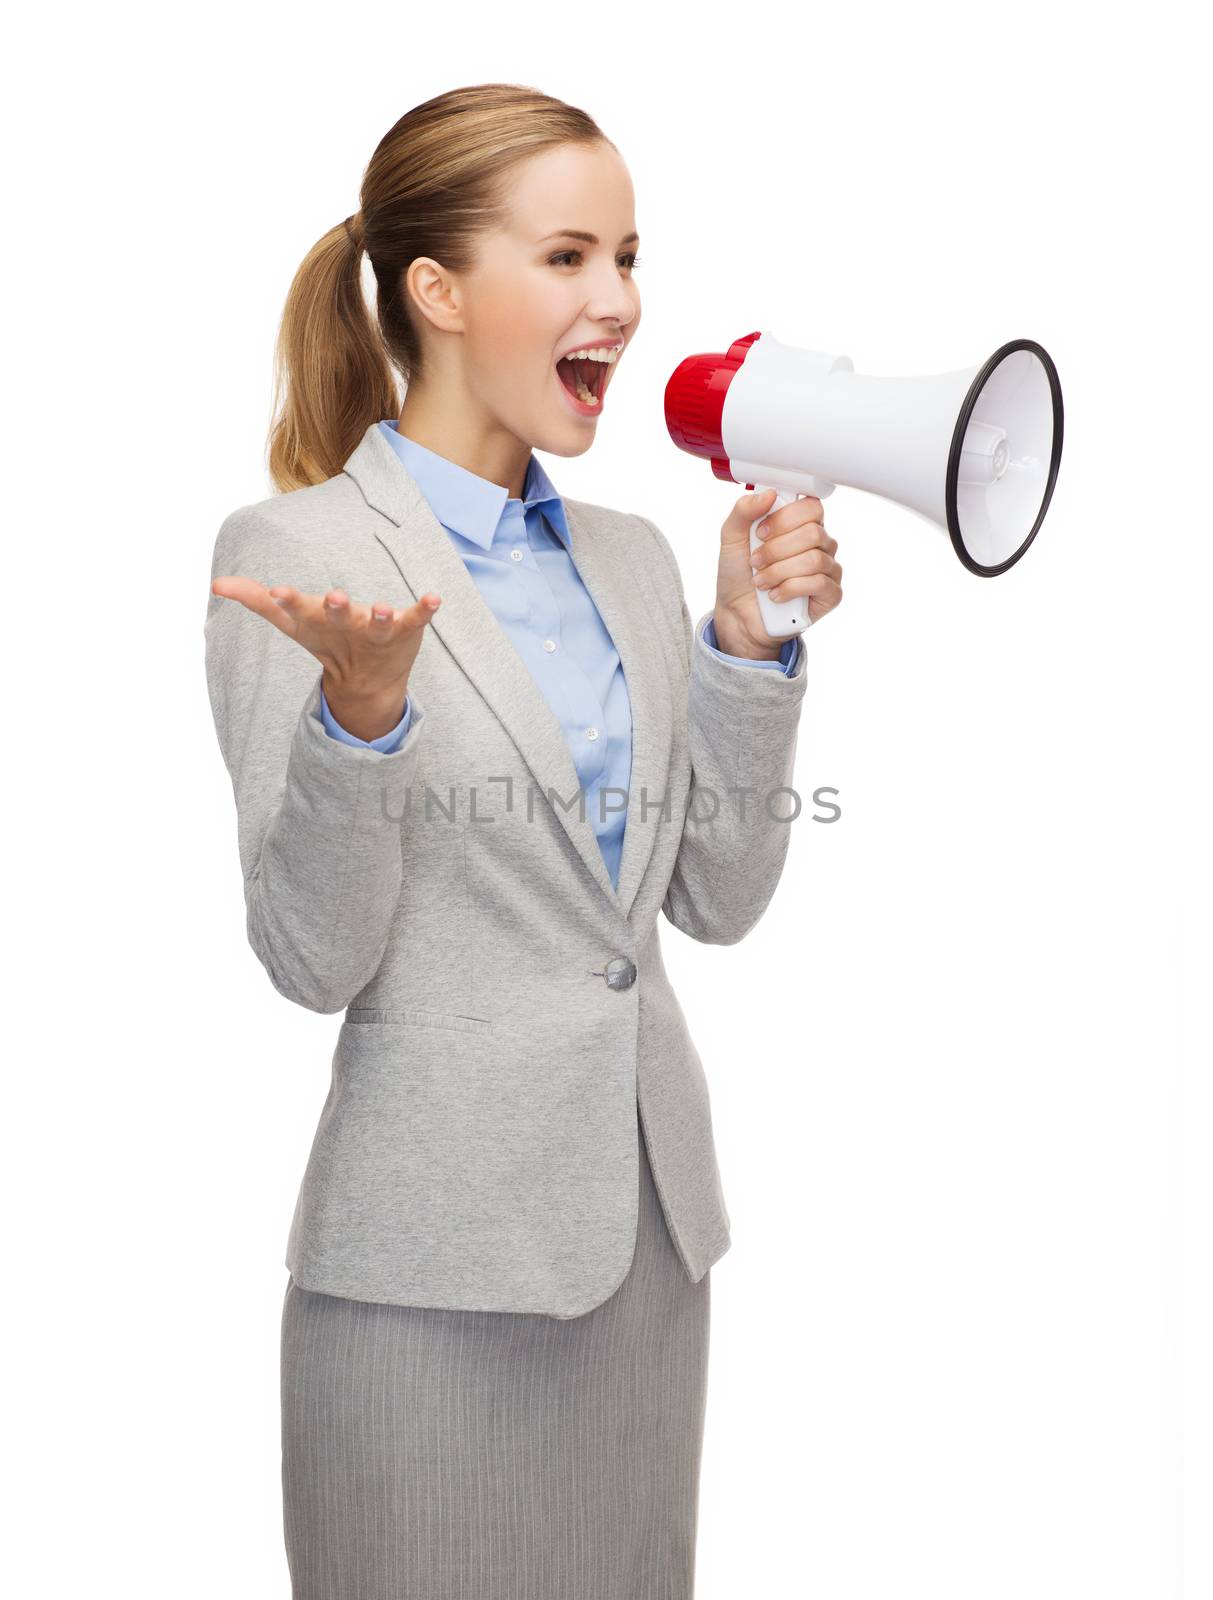 business, communication and office concept - smiling businesswoman with megaphone